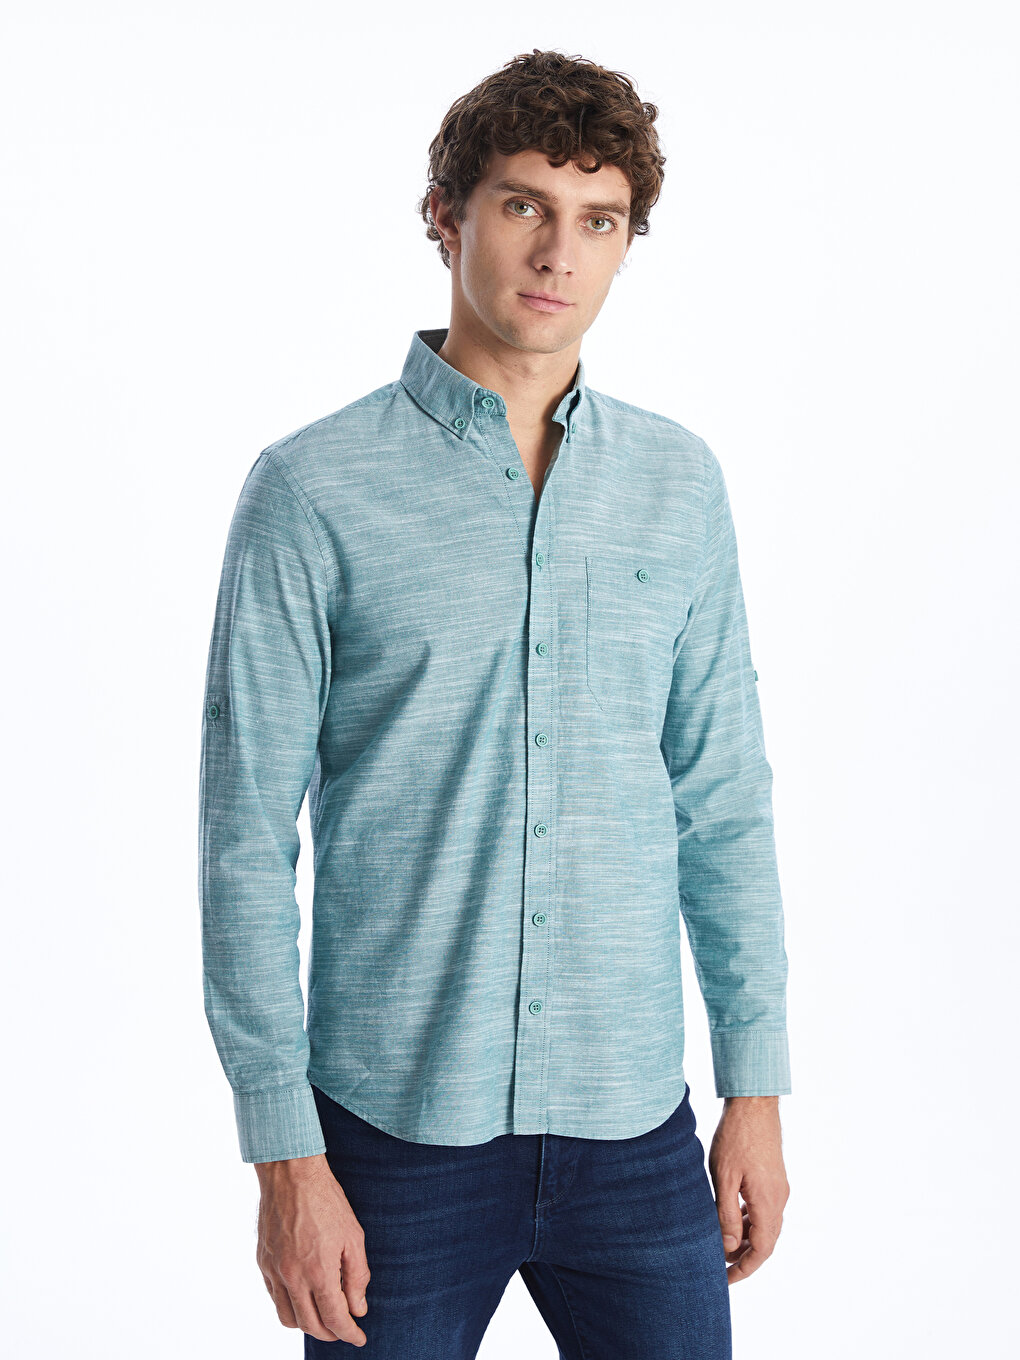 Front Button Closure Straight Long Sleeve Men's Shirt -S41947Z8